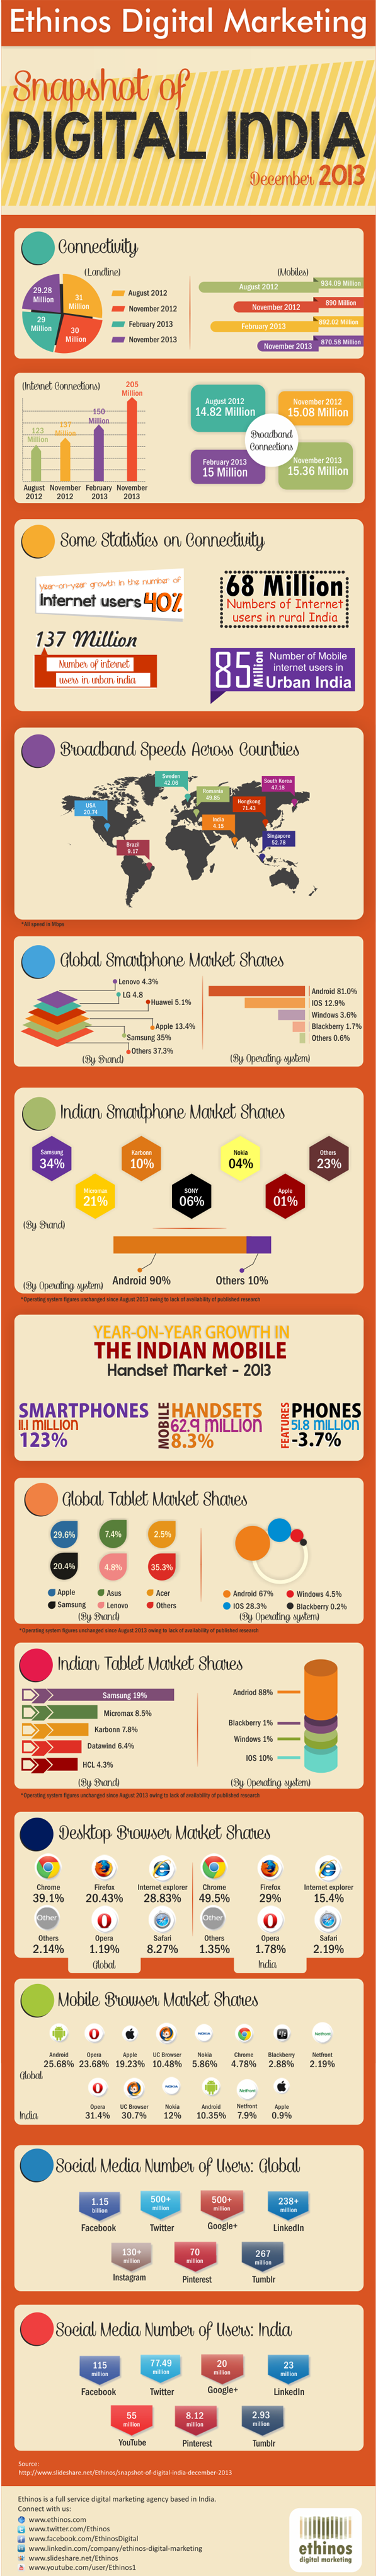 infographic digital media usage in India